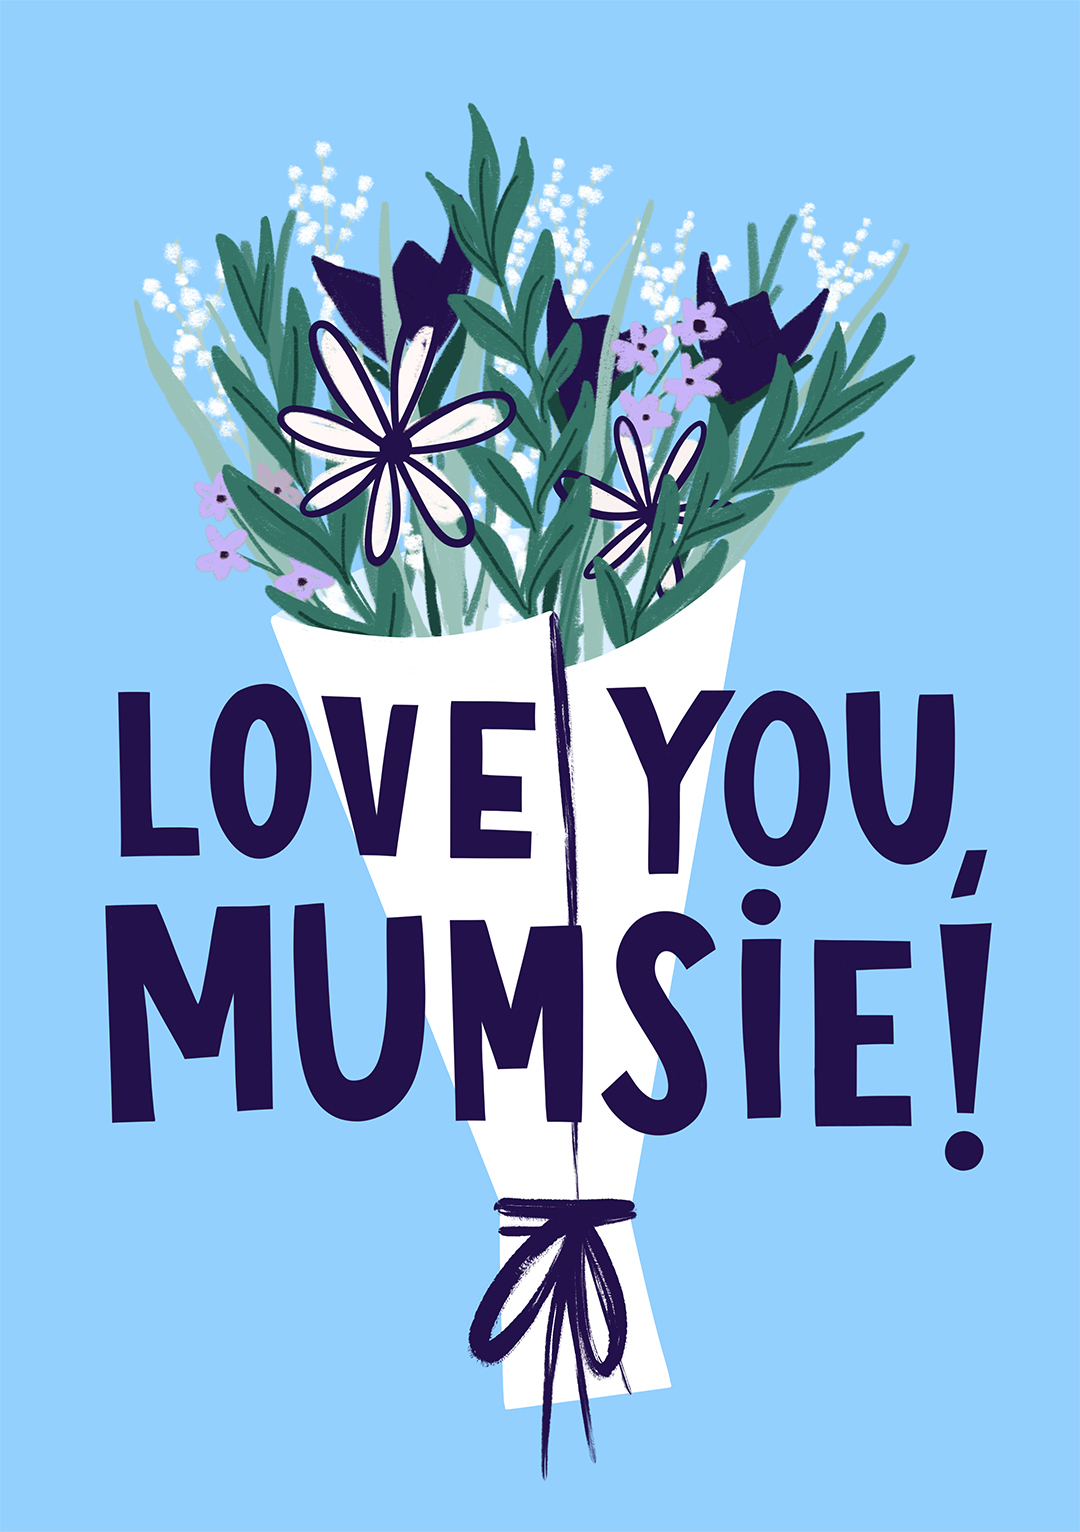 Love You, Mumsie! - Mother's Day Card